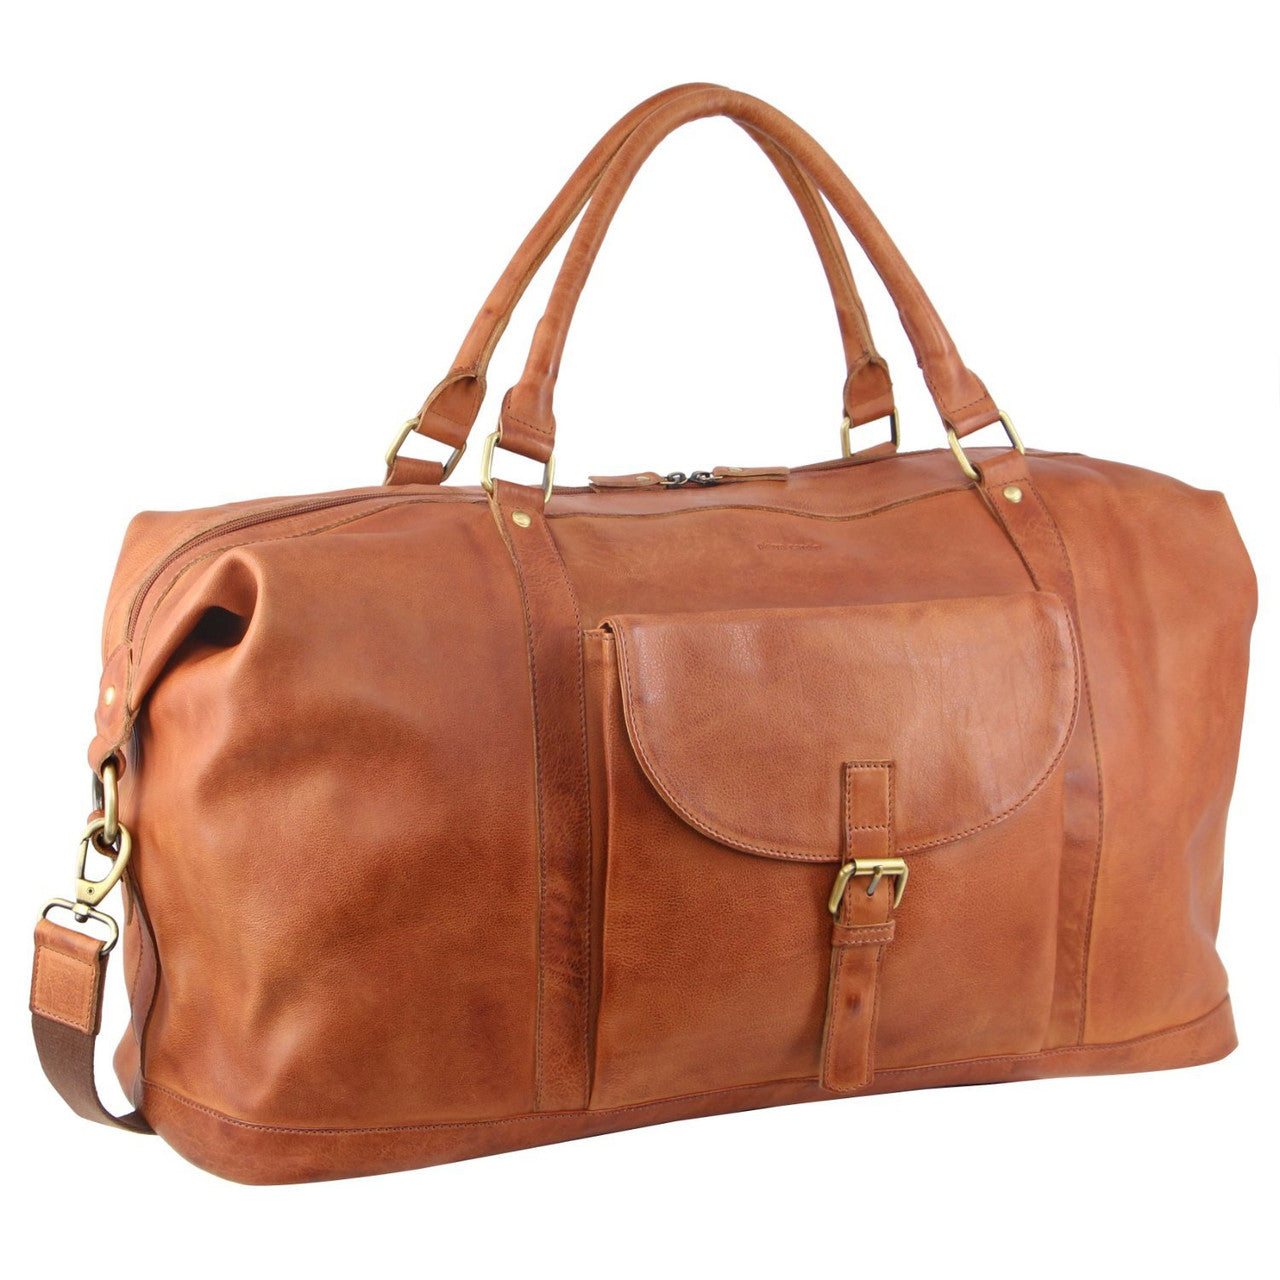 Pierre Cardin - Rustic Leather Overnight Bag with front flap pocket PC3134 - Cognac